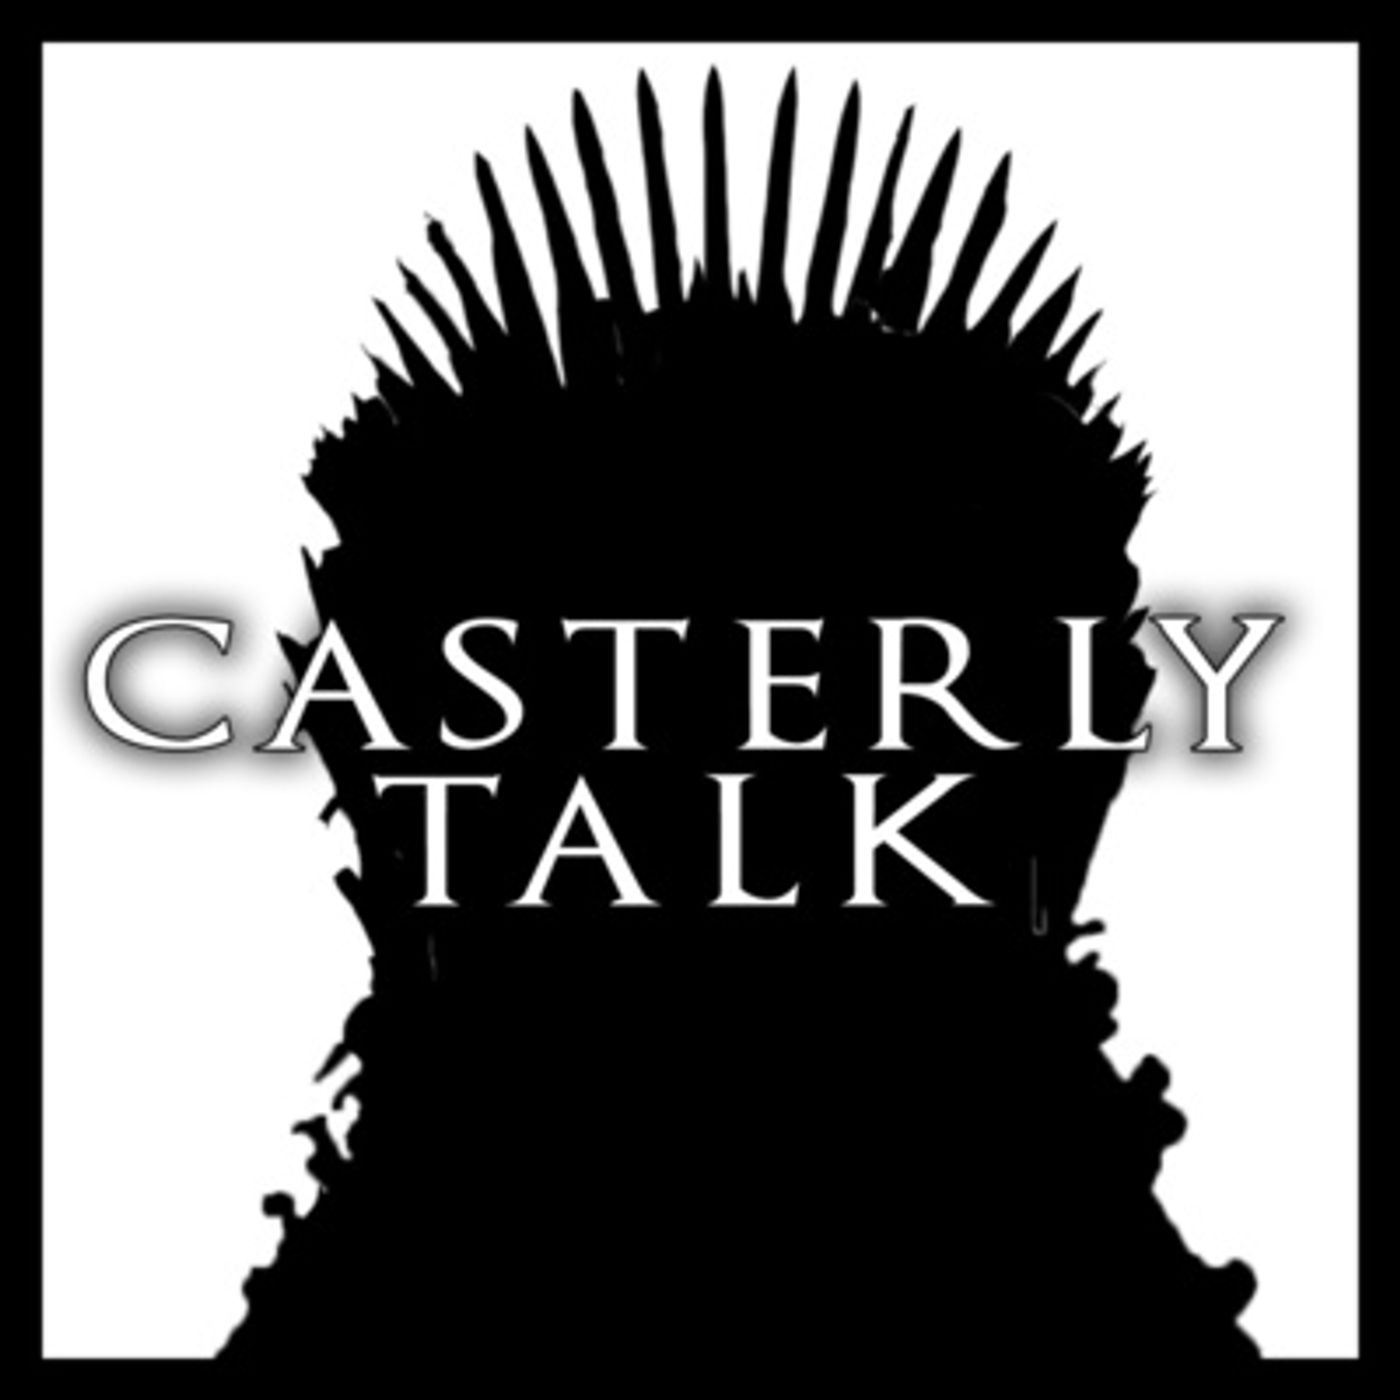 THE HOUSE OF THE DRAGON TEASER TRAILER - Casterly Talk - EP 106